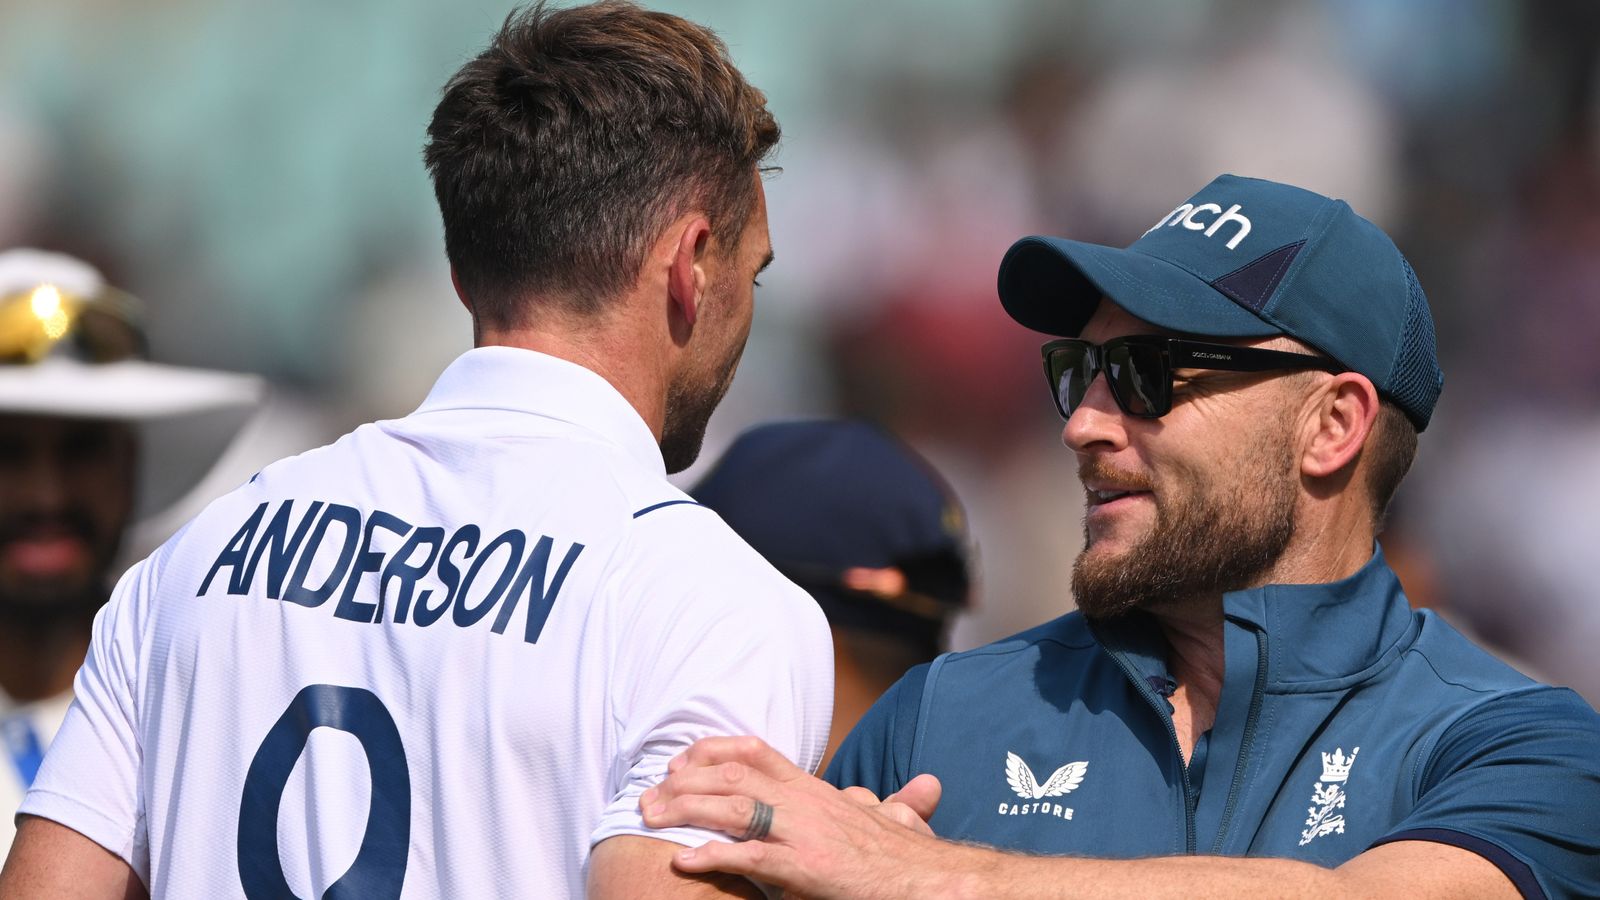 James Anderson to retire from England: Pundits on why now is time to end record-breaking Test career